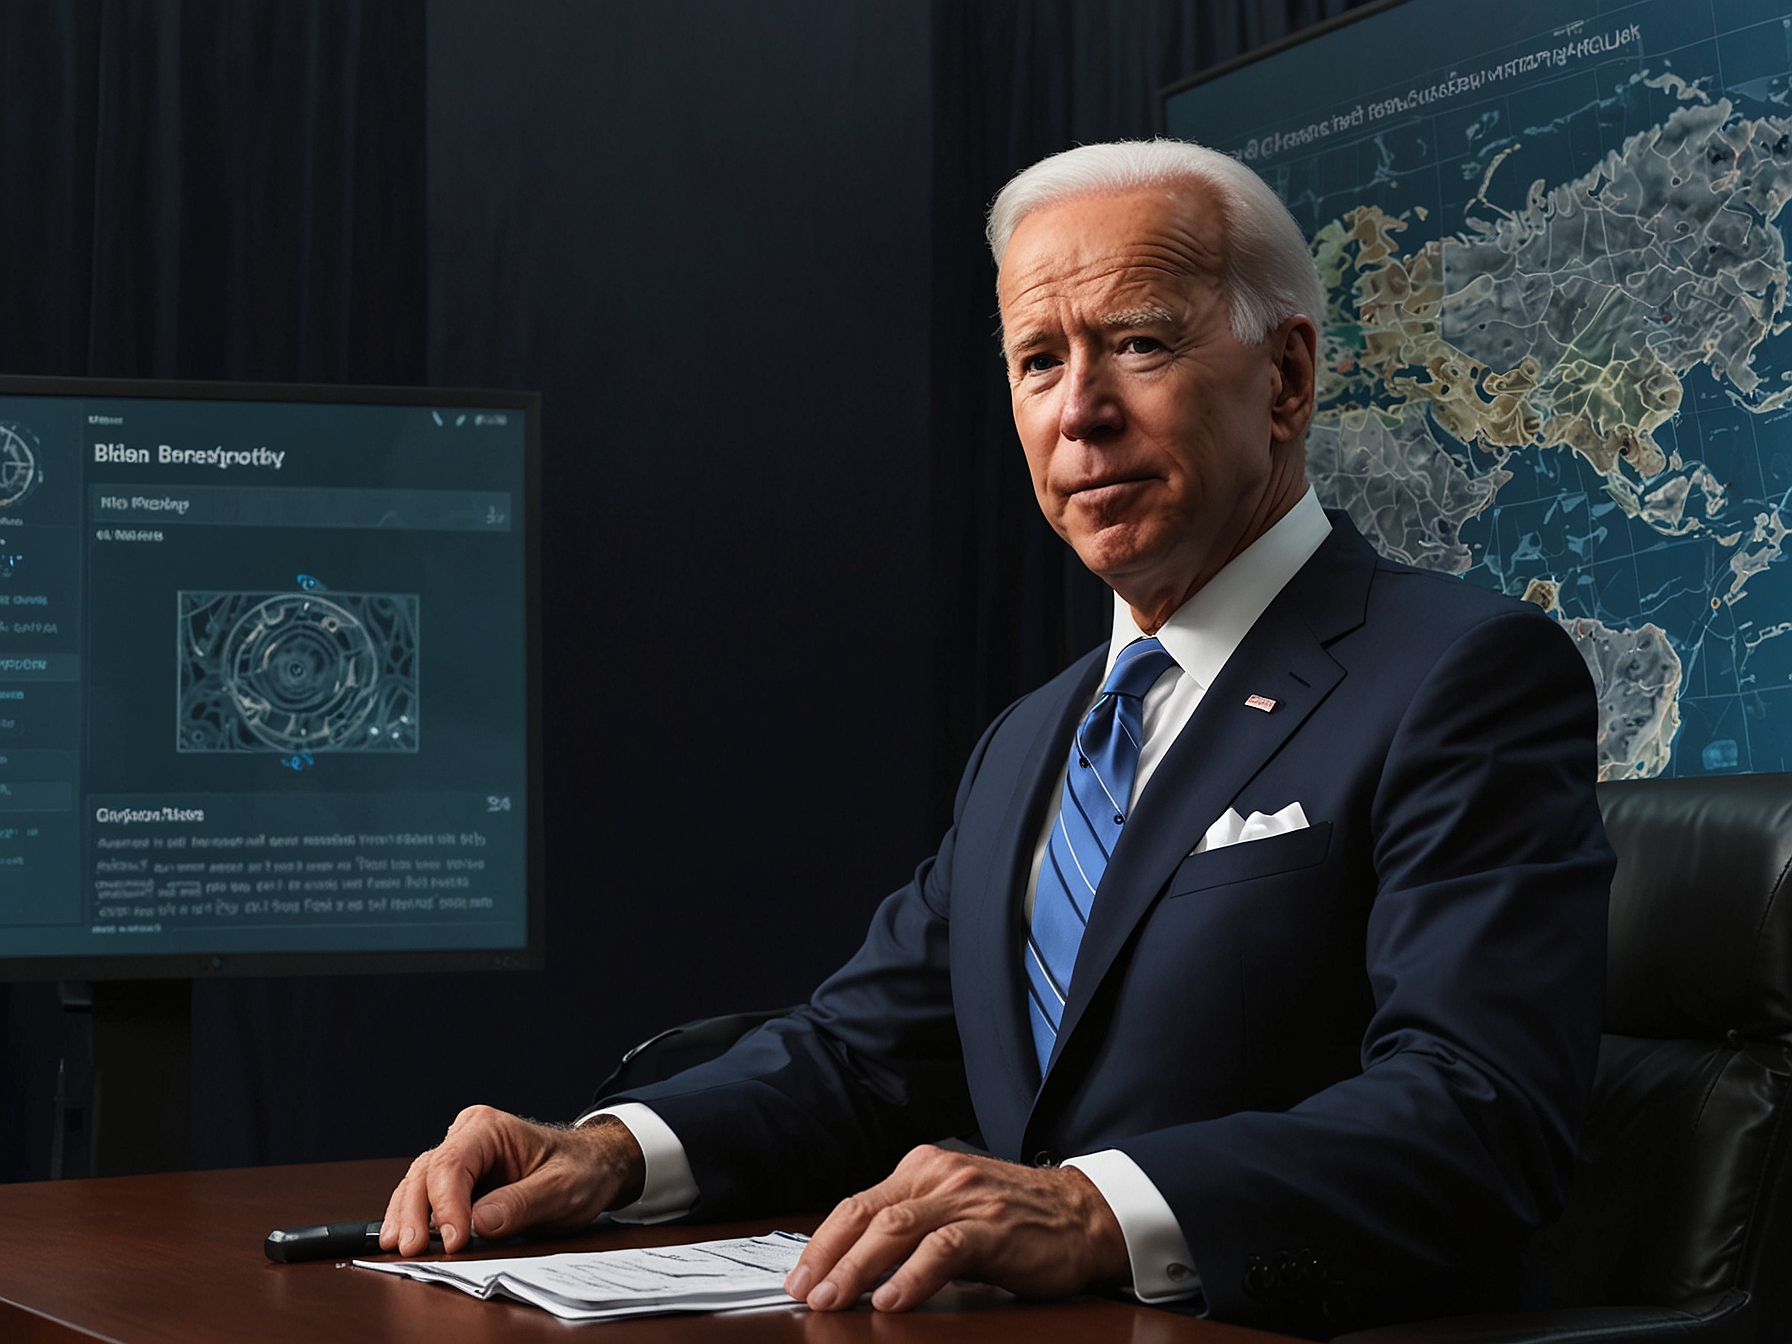 President Joe Biden at a press conference, explaining the need for stringent cybersecurity measures and announcing the ban on Kaspersky antivirus software due to its alleged Russian connections.